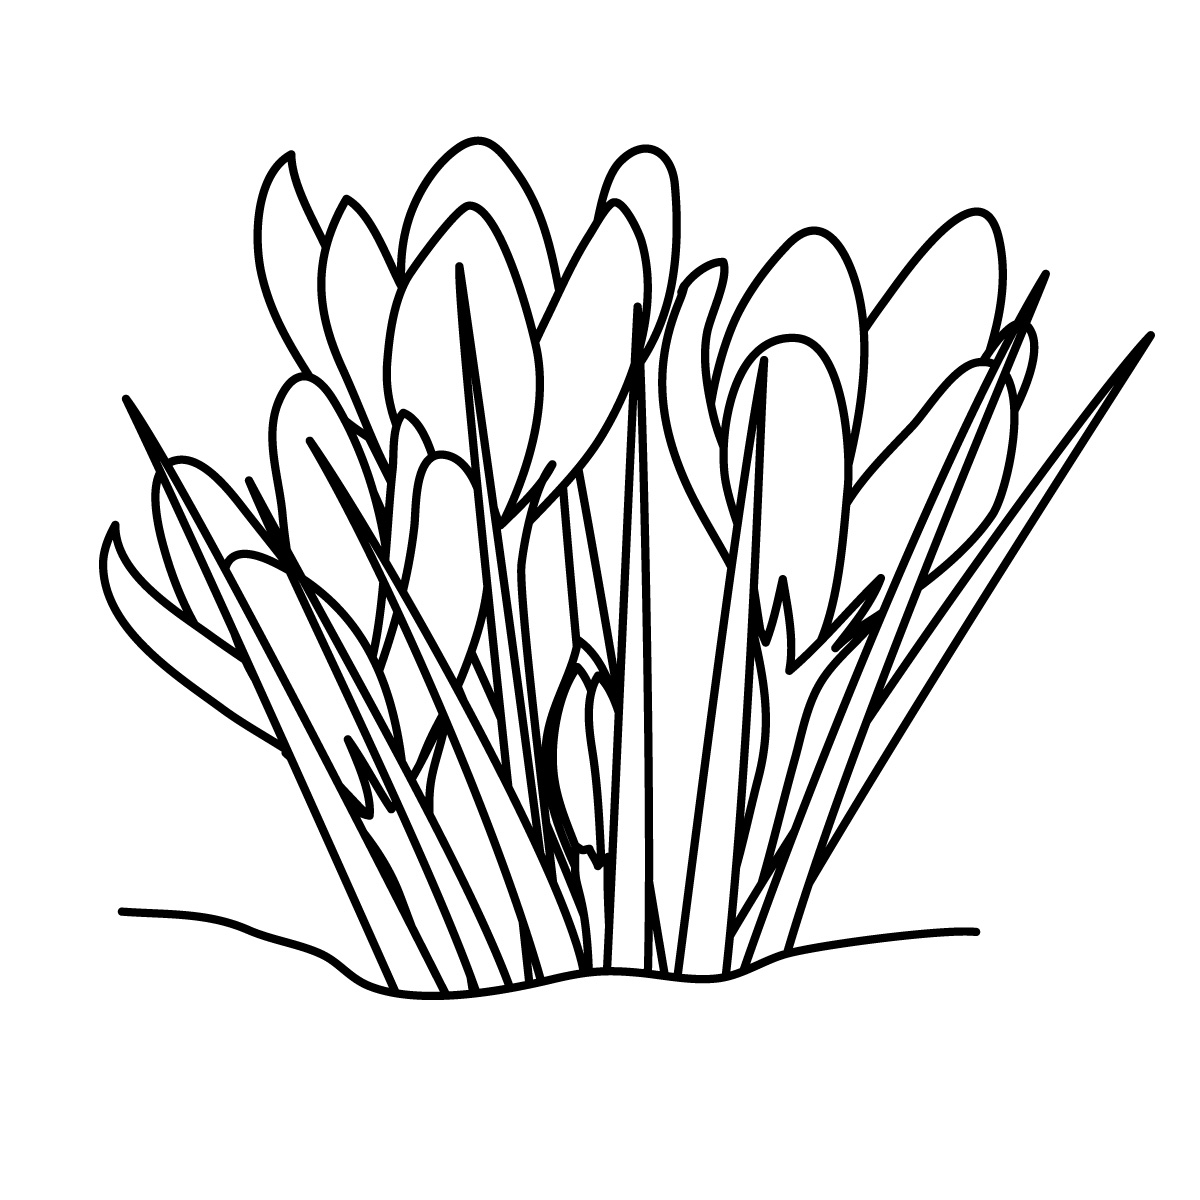 Daffodil clipart black and white